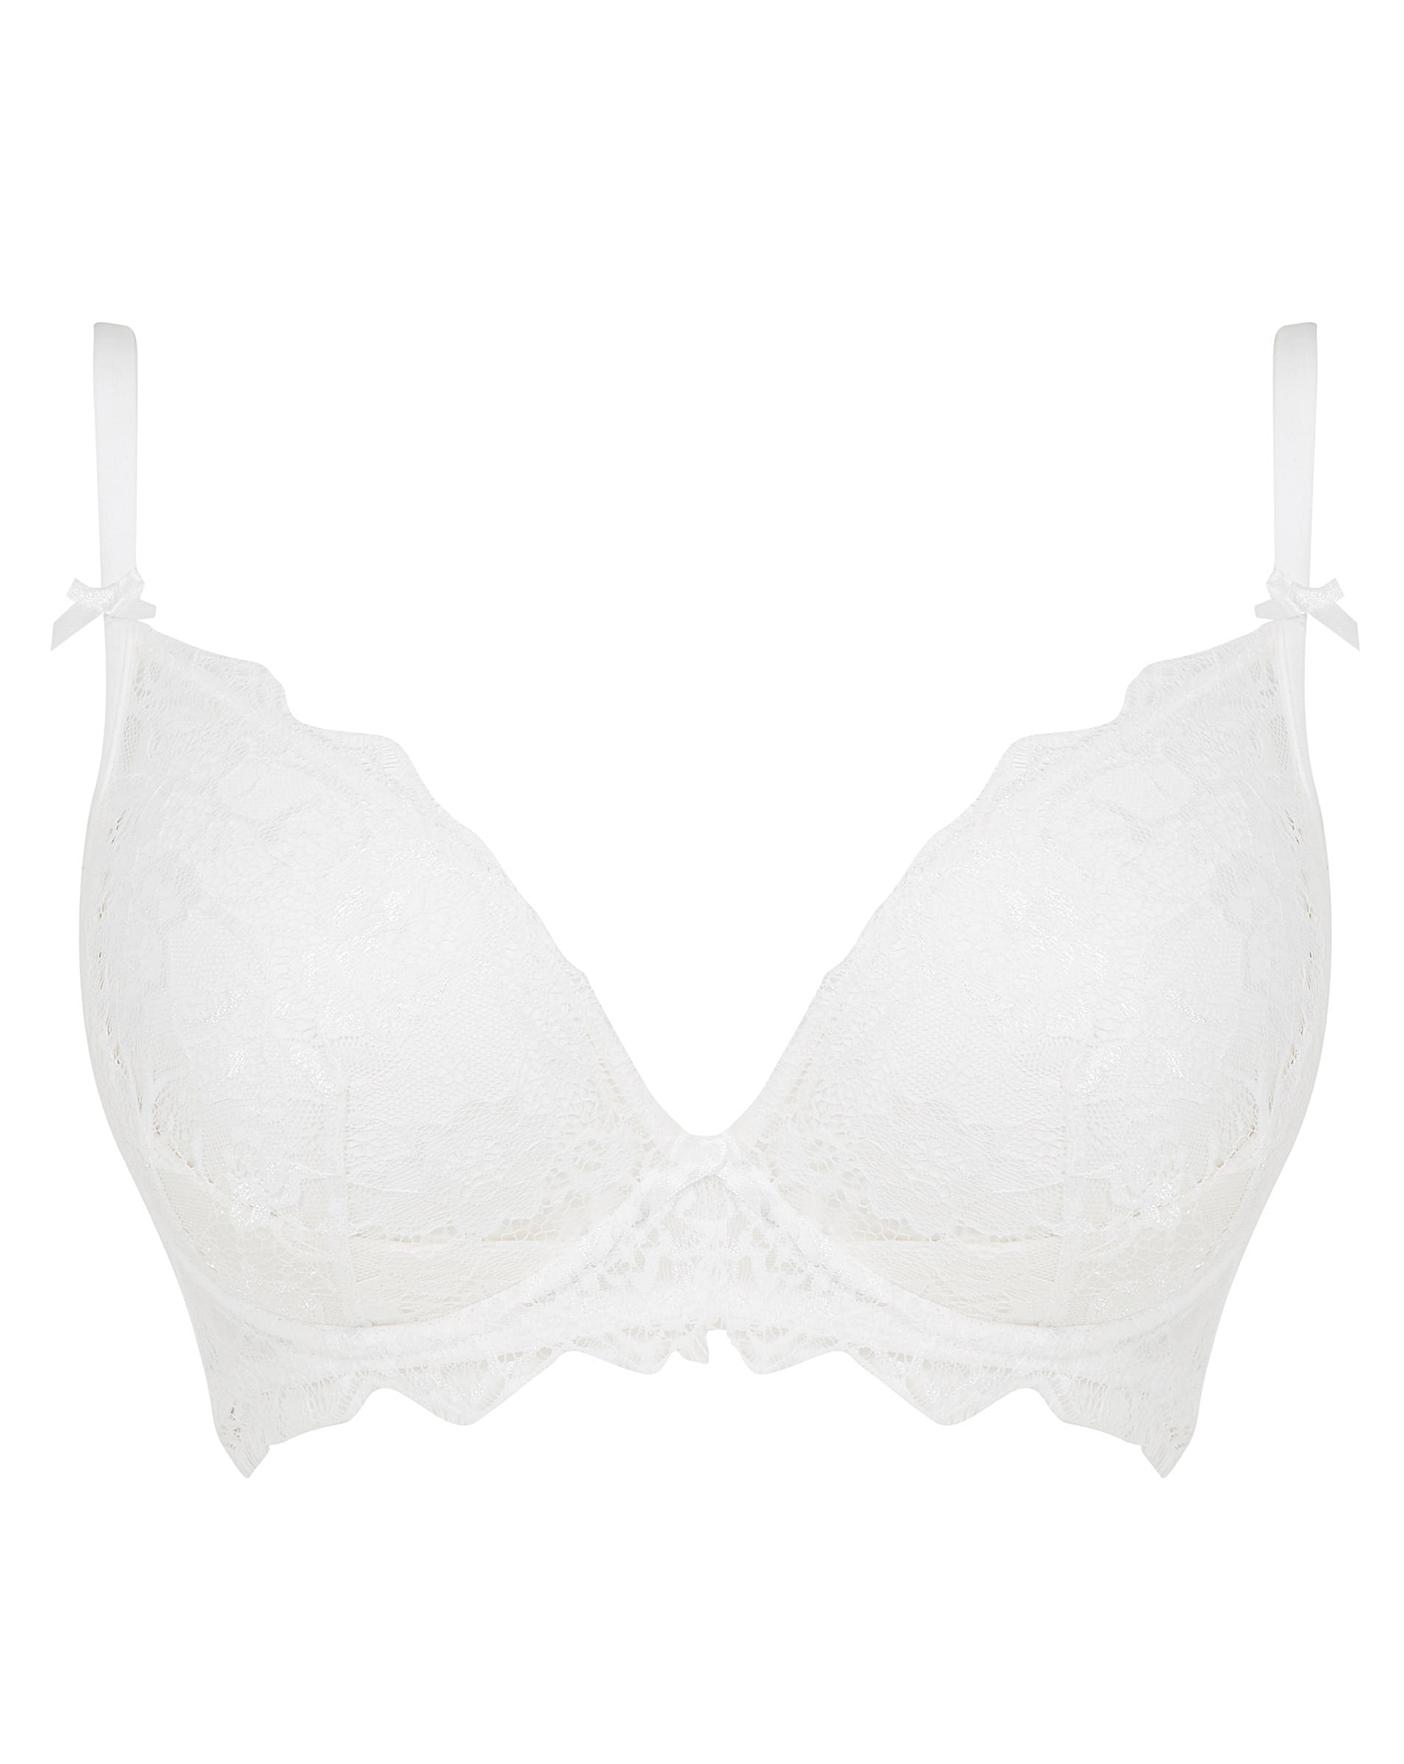 Figleaves Pulse Lace Underwired Plunge Bra